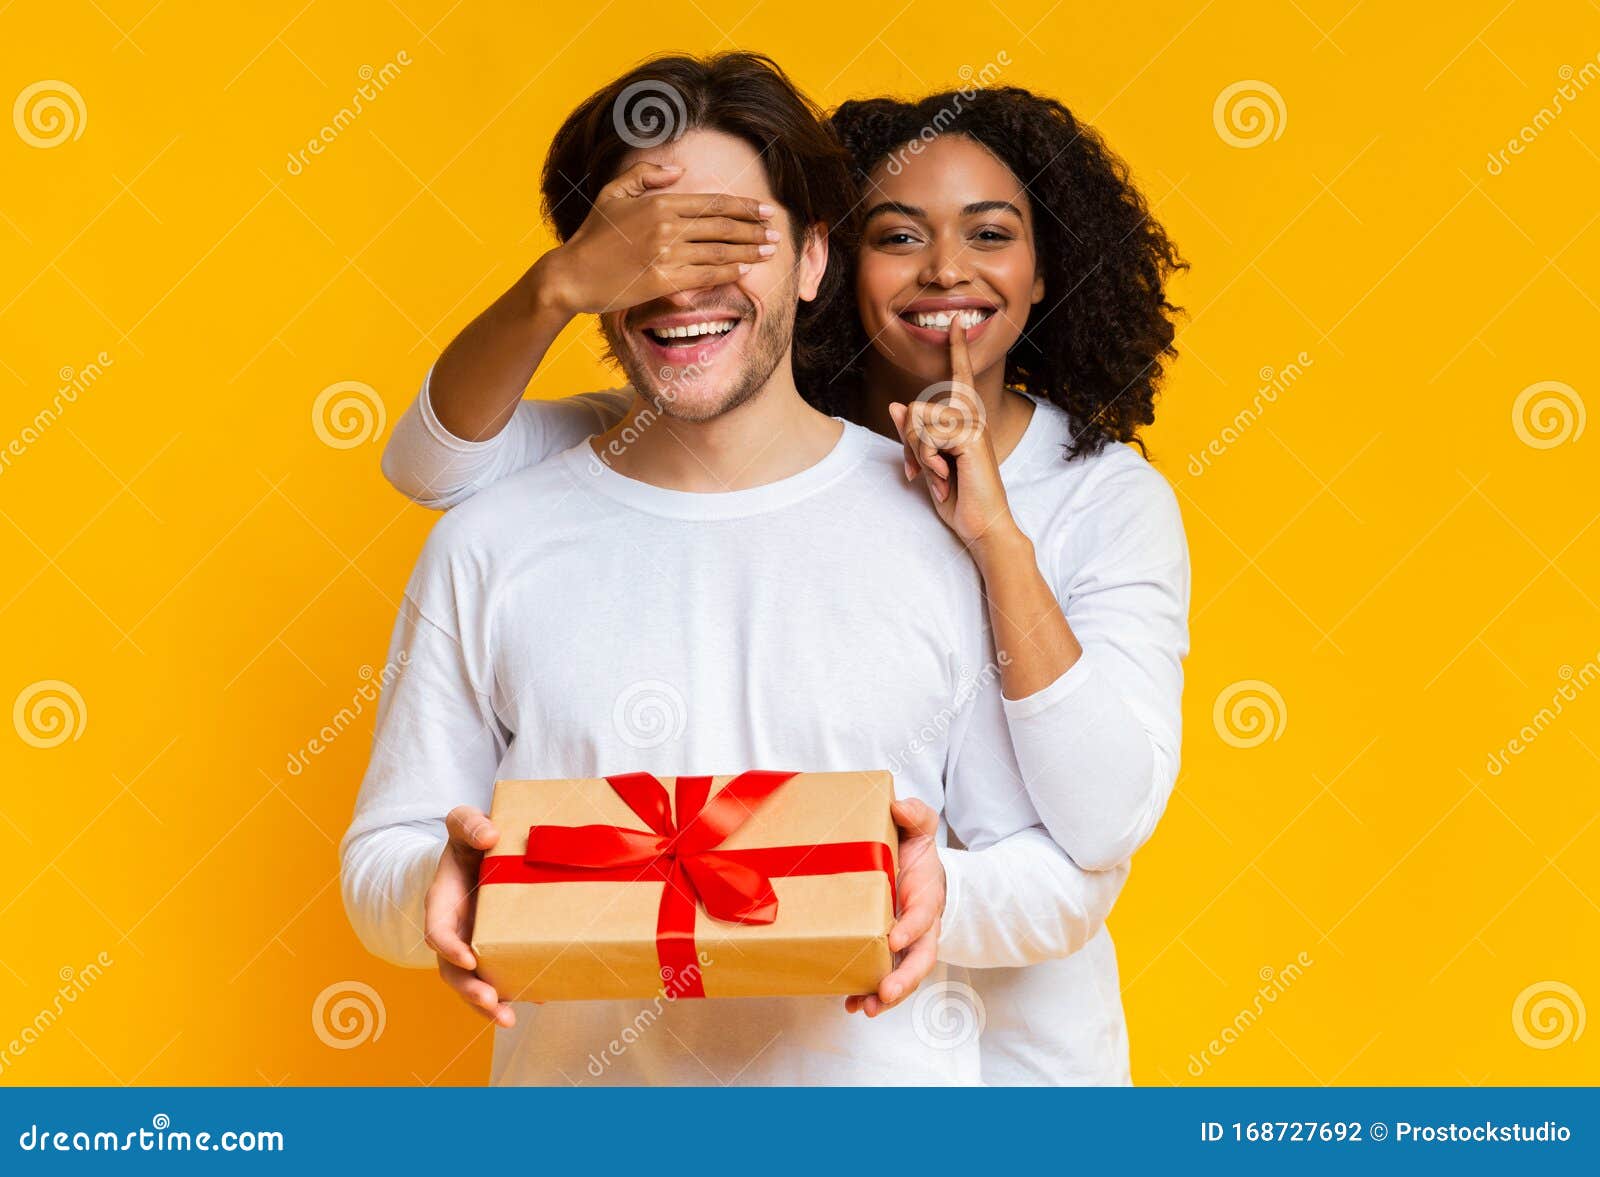 Best and Unique Gifts for Boyfriend - Top Ideas to Surprise Him